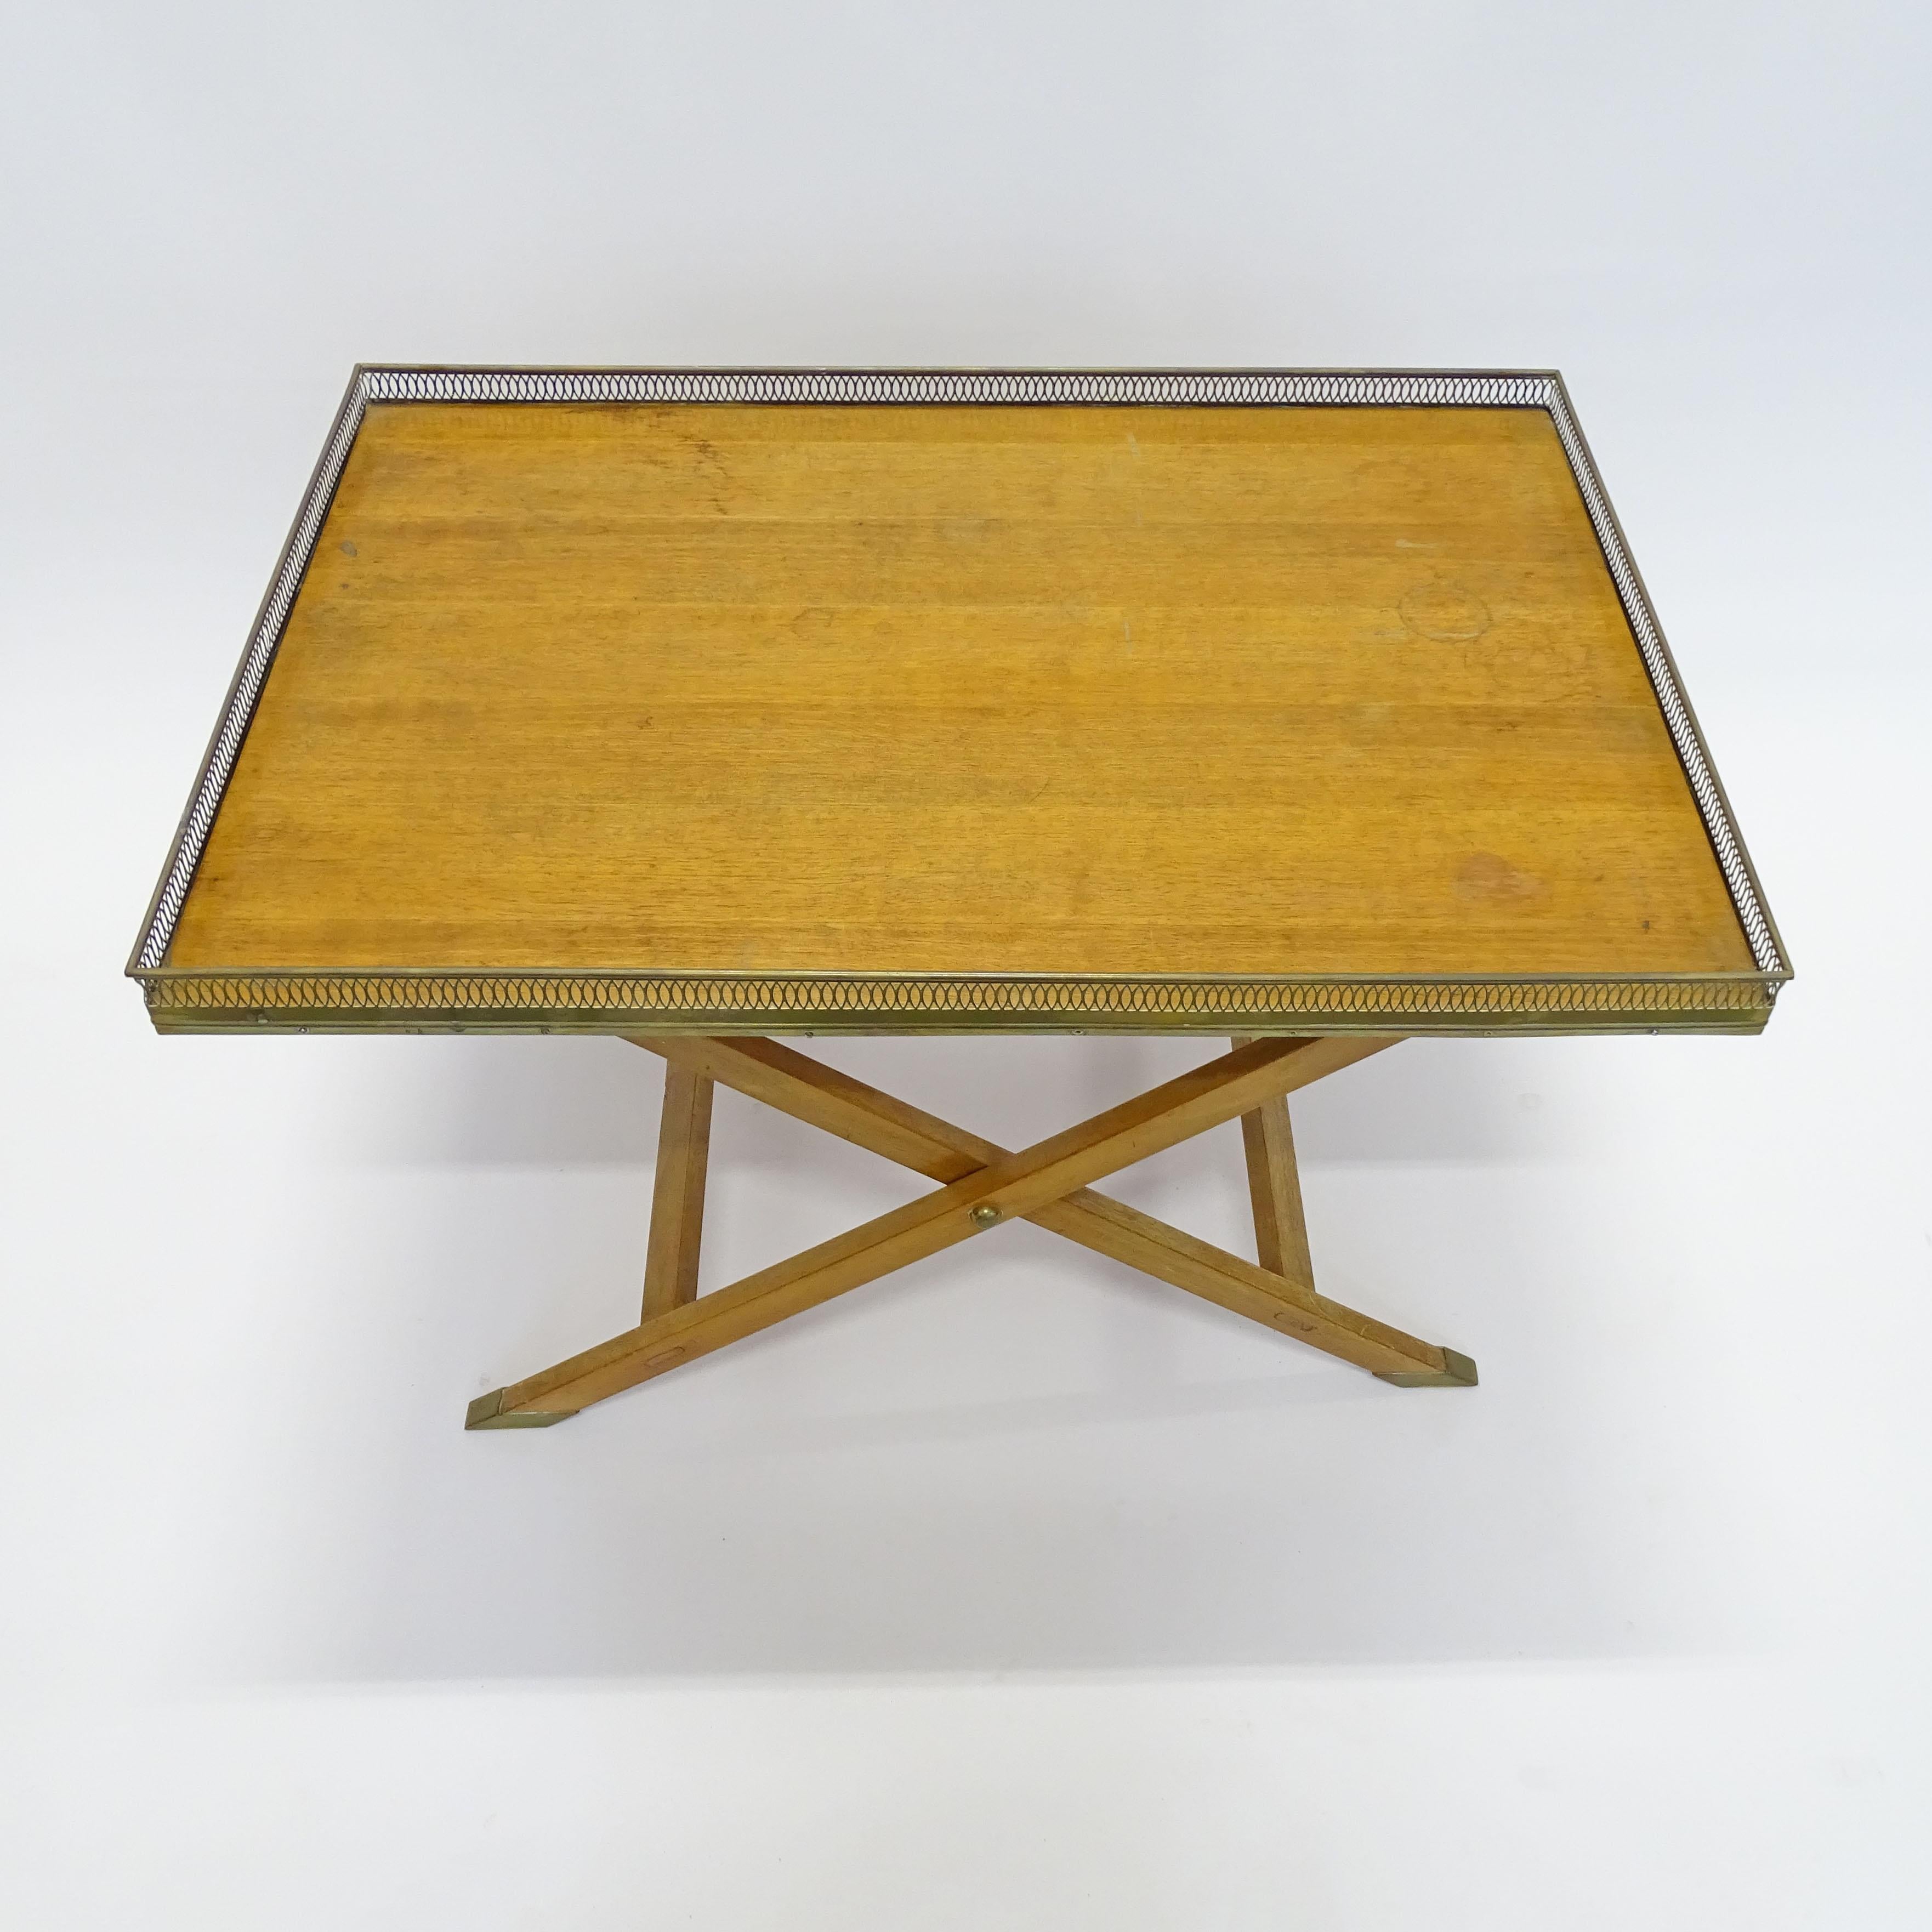 Splendid Wood and Brass Folding Coffee Table, 1950s For Sale 2